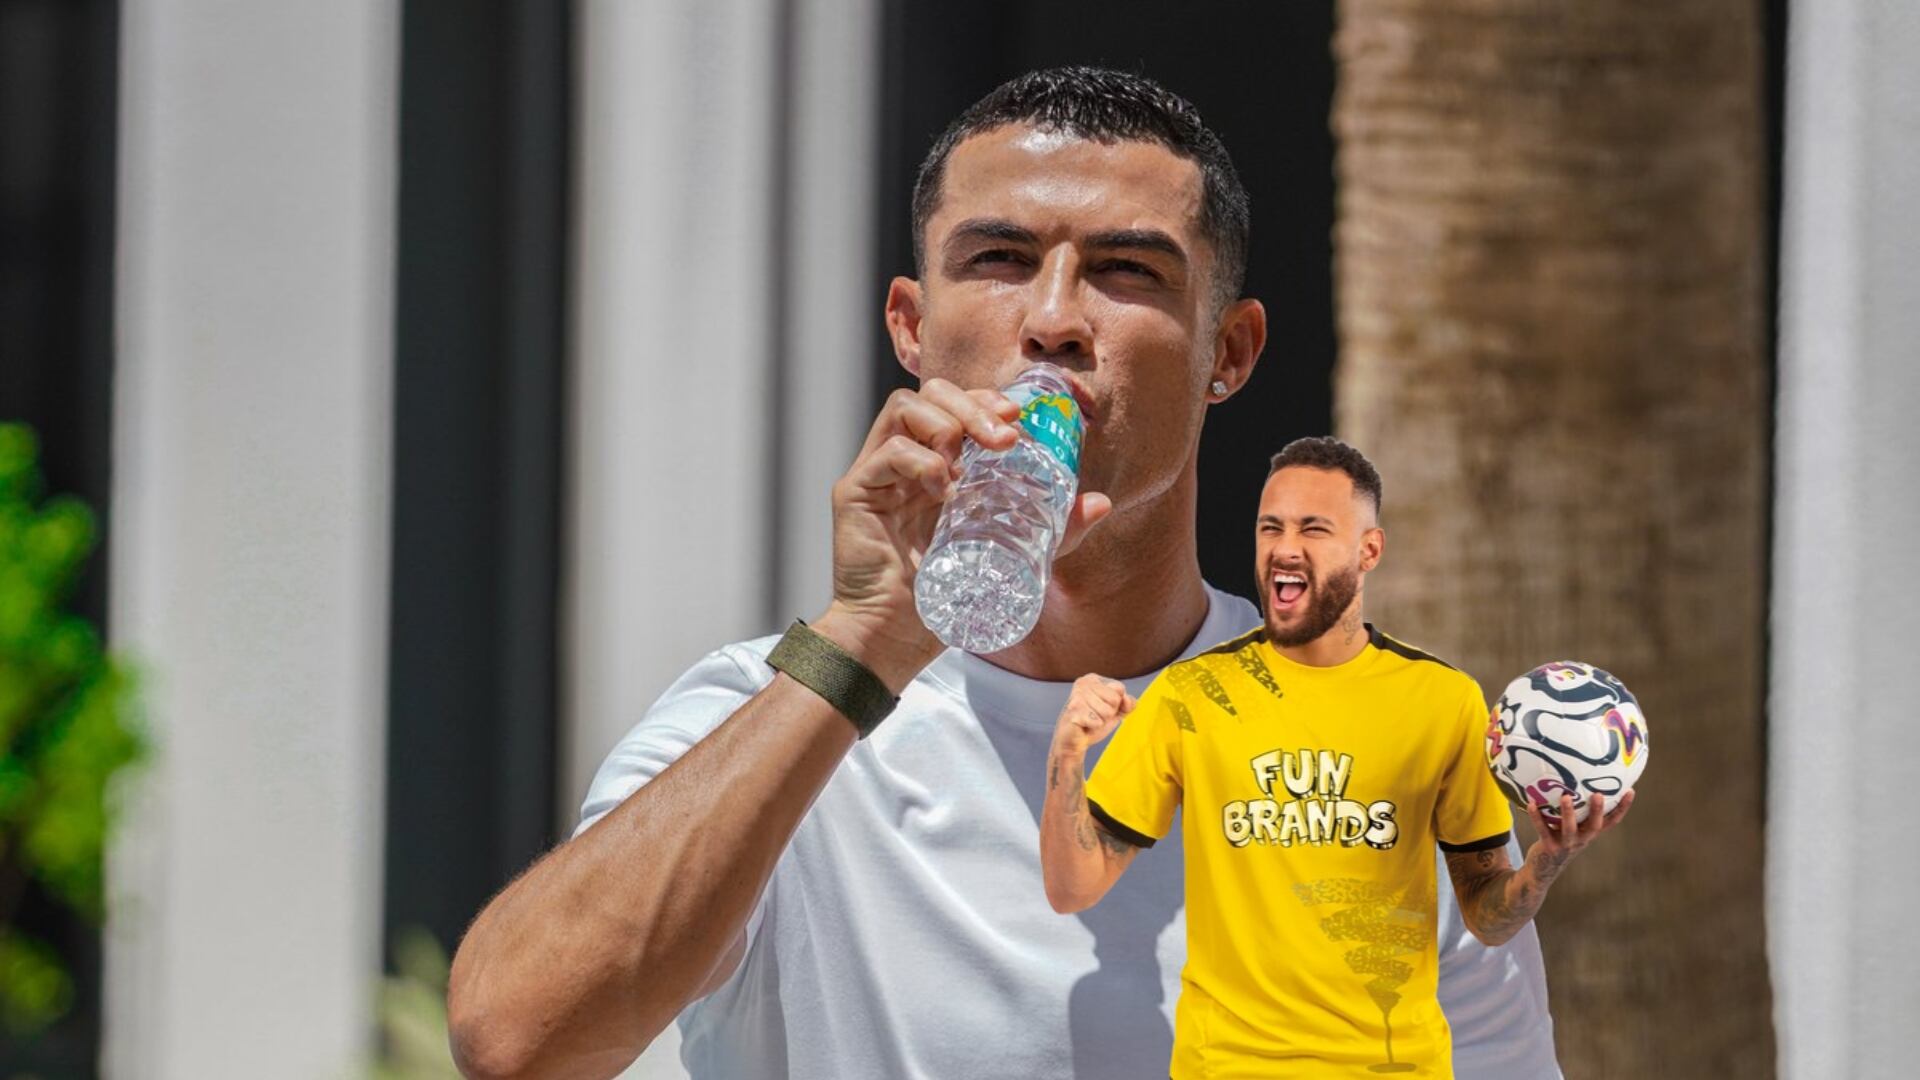 Cristiano earns more than $40M with his own brand of natural water, what Neymar could earn promoting alcoholic beverages